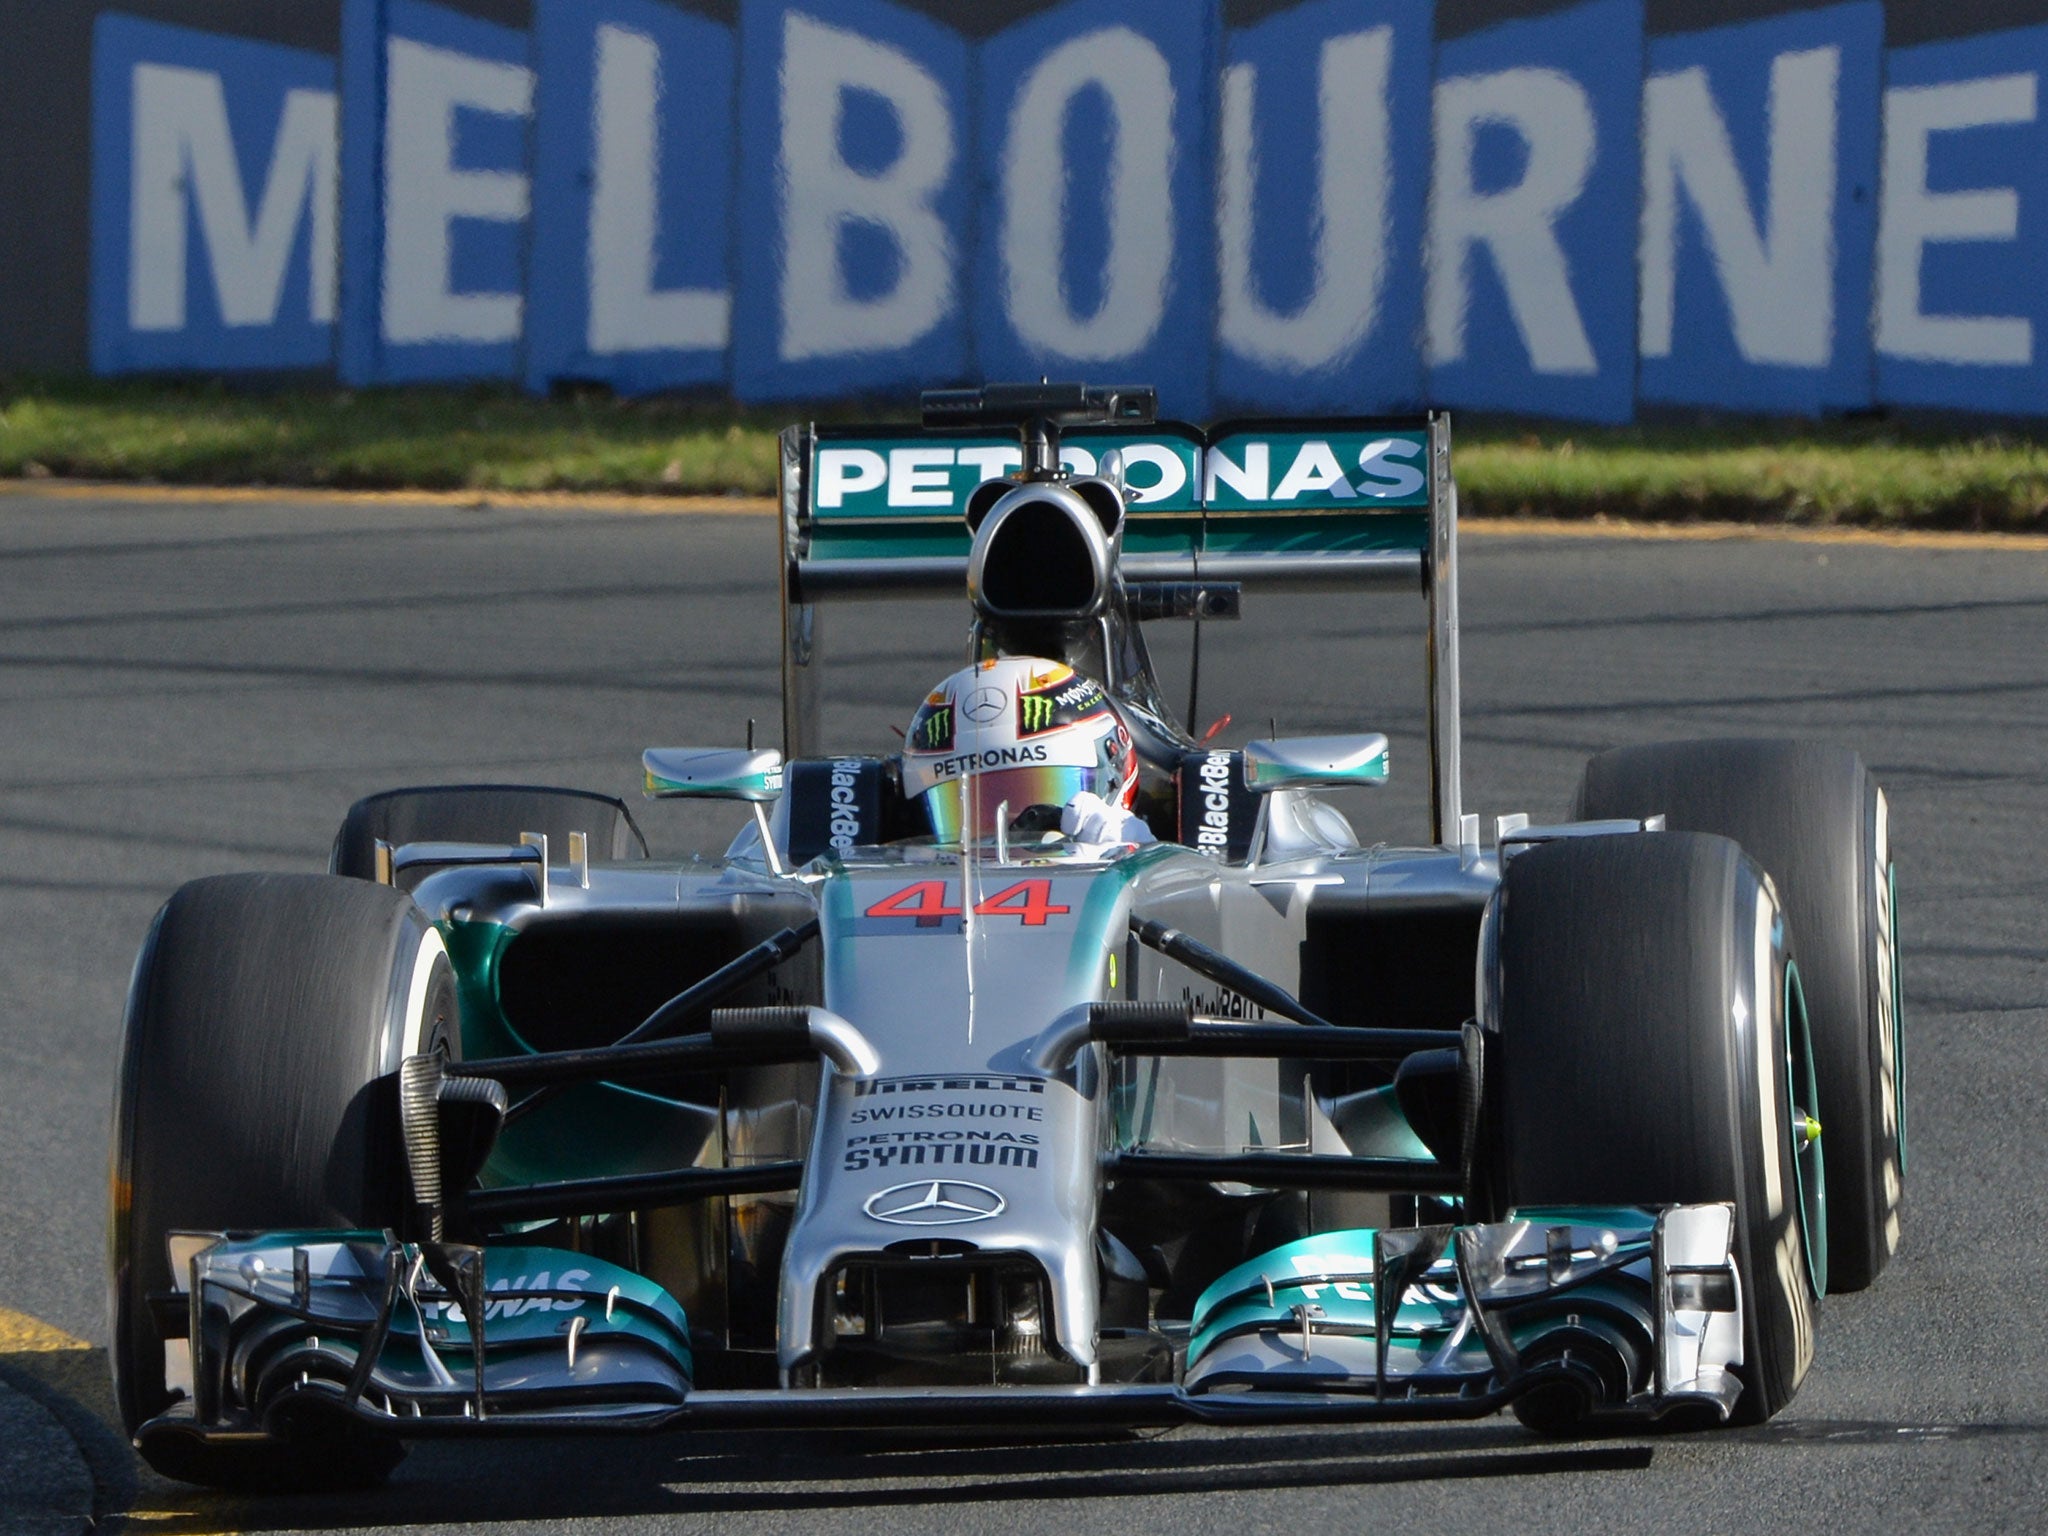 Mercedes driver Lewis Hamilton of Britain powers through a corner during the second practice session of the Australian Grand Prix in Melbourne